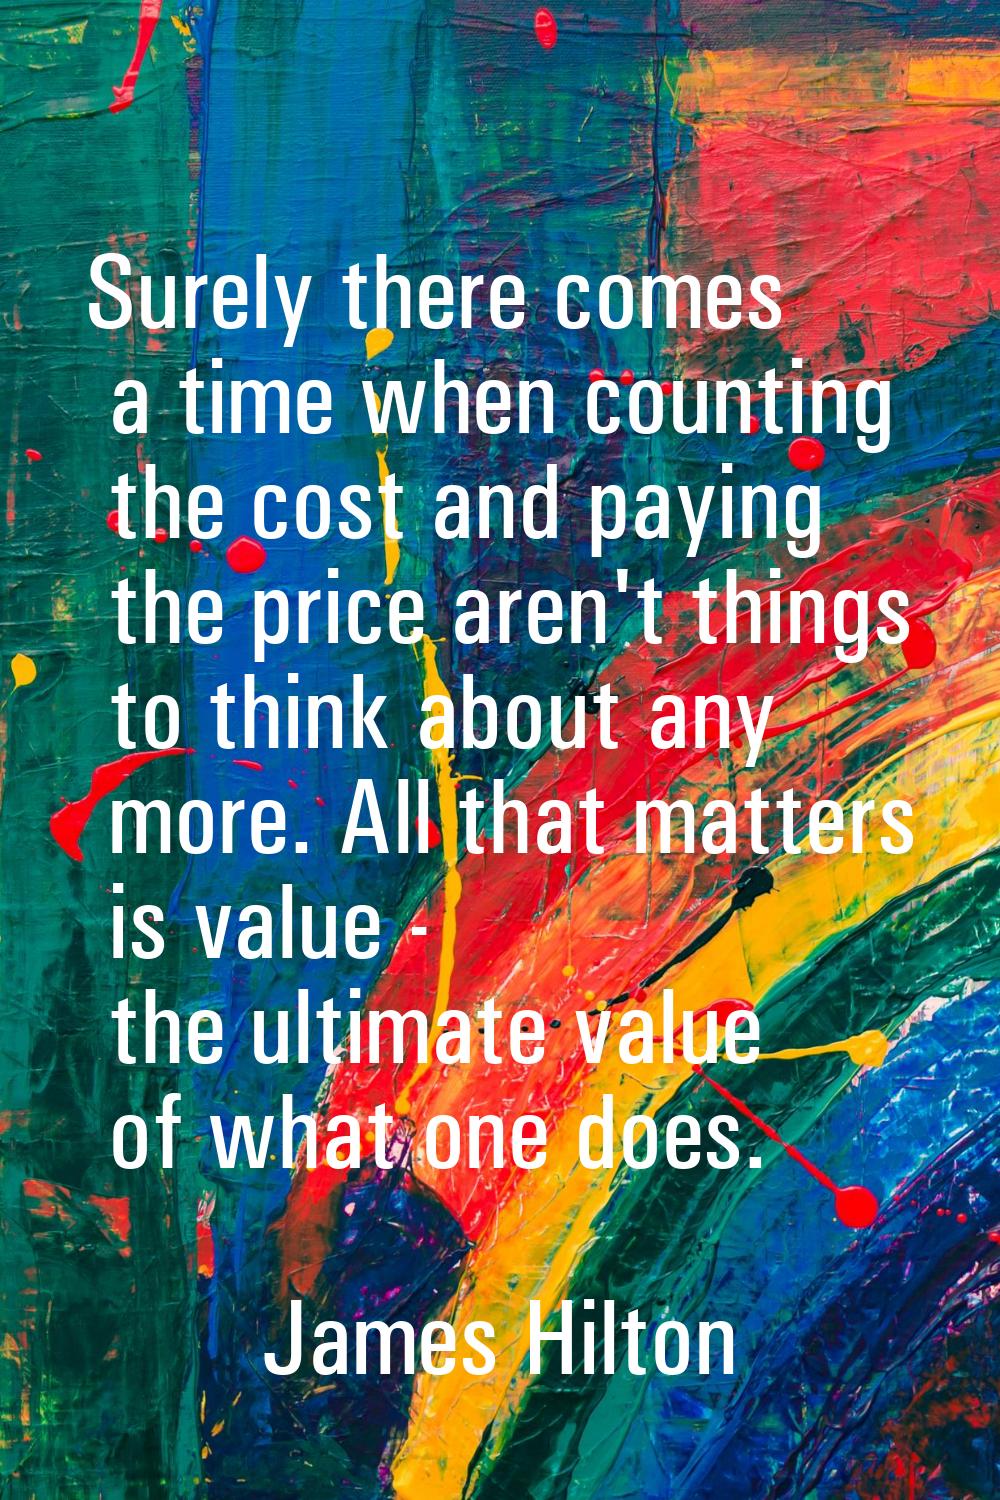 Surely there comes a time when counting the cost and paying the price aren't things to think about 